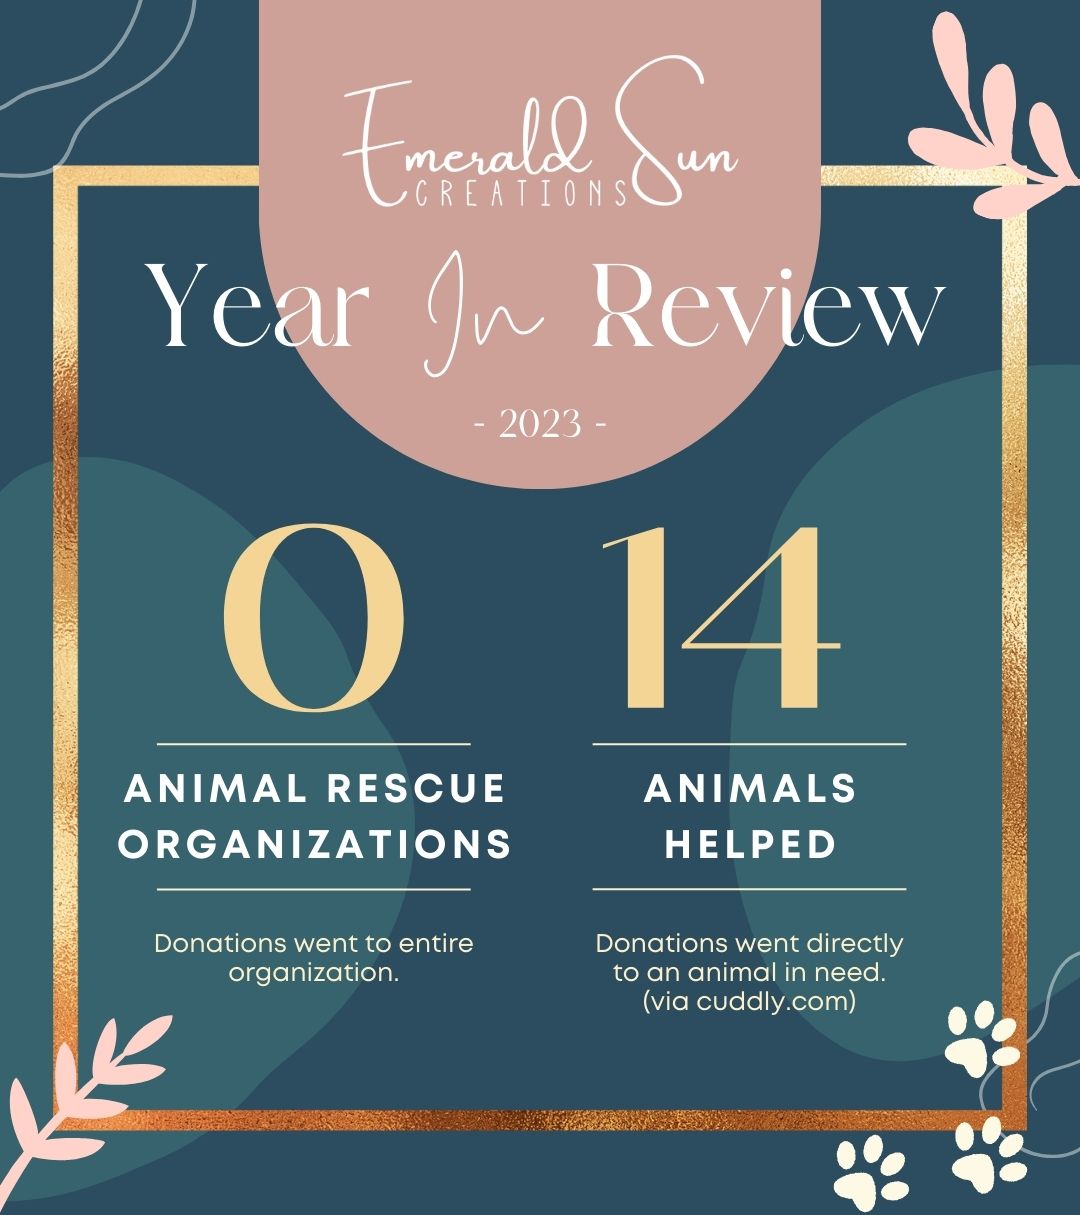 2023 Year in Review - See what our good intentions accomplished this year! Emerald Sun Creations | Natural gemstone jewelry with good intentions.